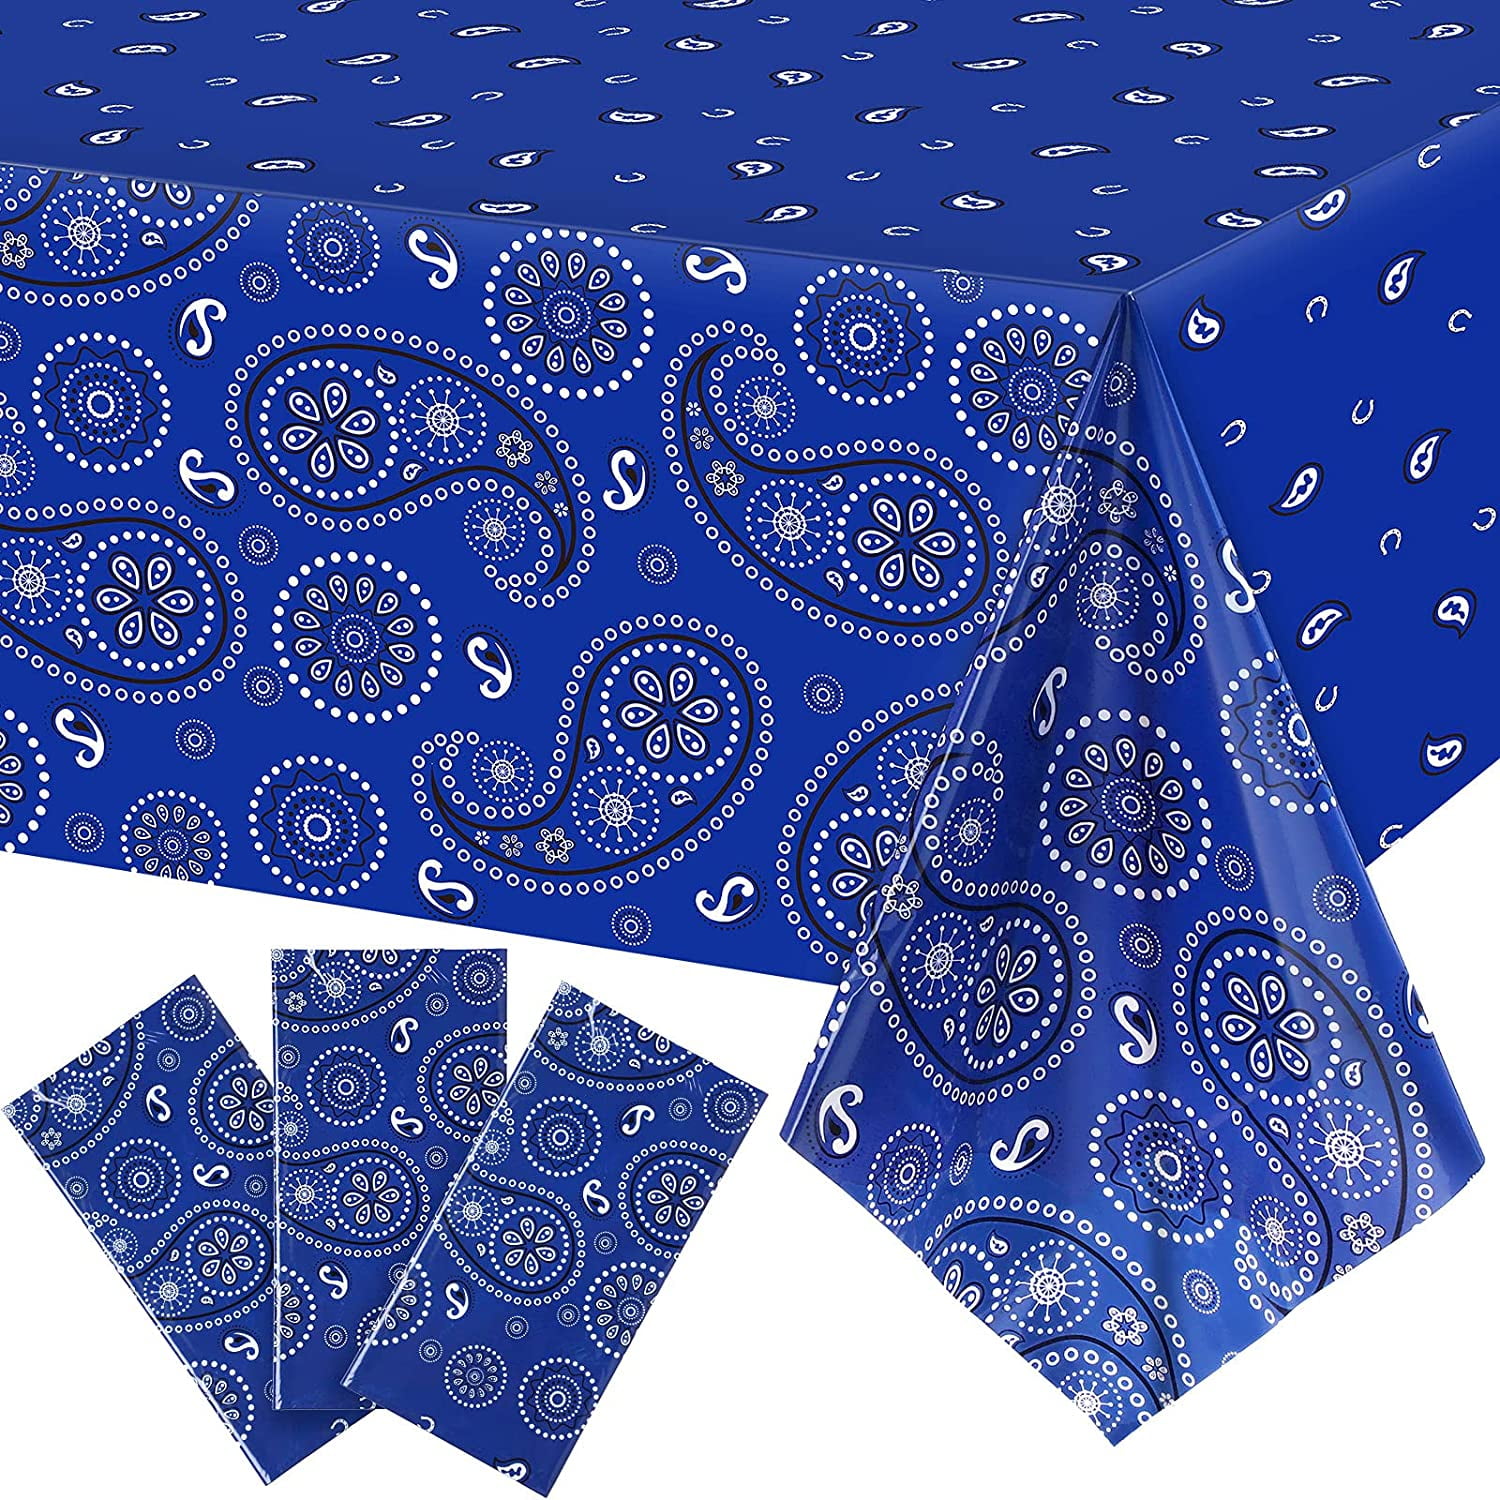 Western Party Tablecloth Paisley Table Cover Bandana Plastic Table Cloth Rectangle Floral Tablecloth for Western Cowboy Themed Party Decorations 108 X 54 Inches Blue,3 Pack 